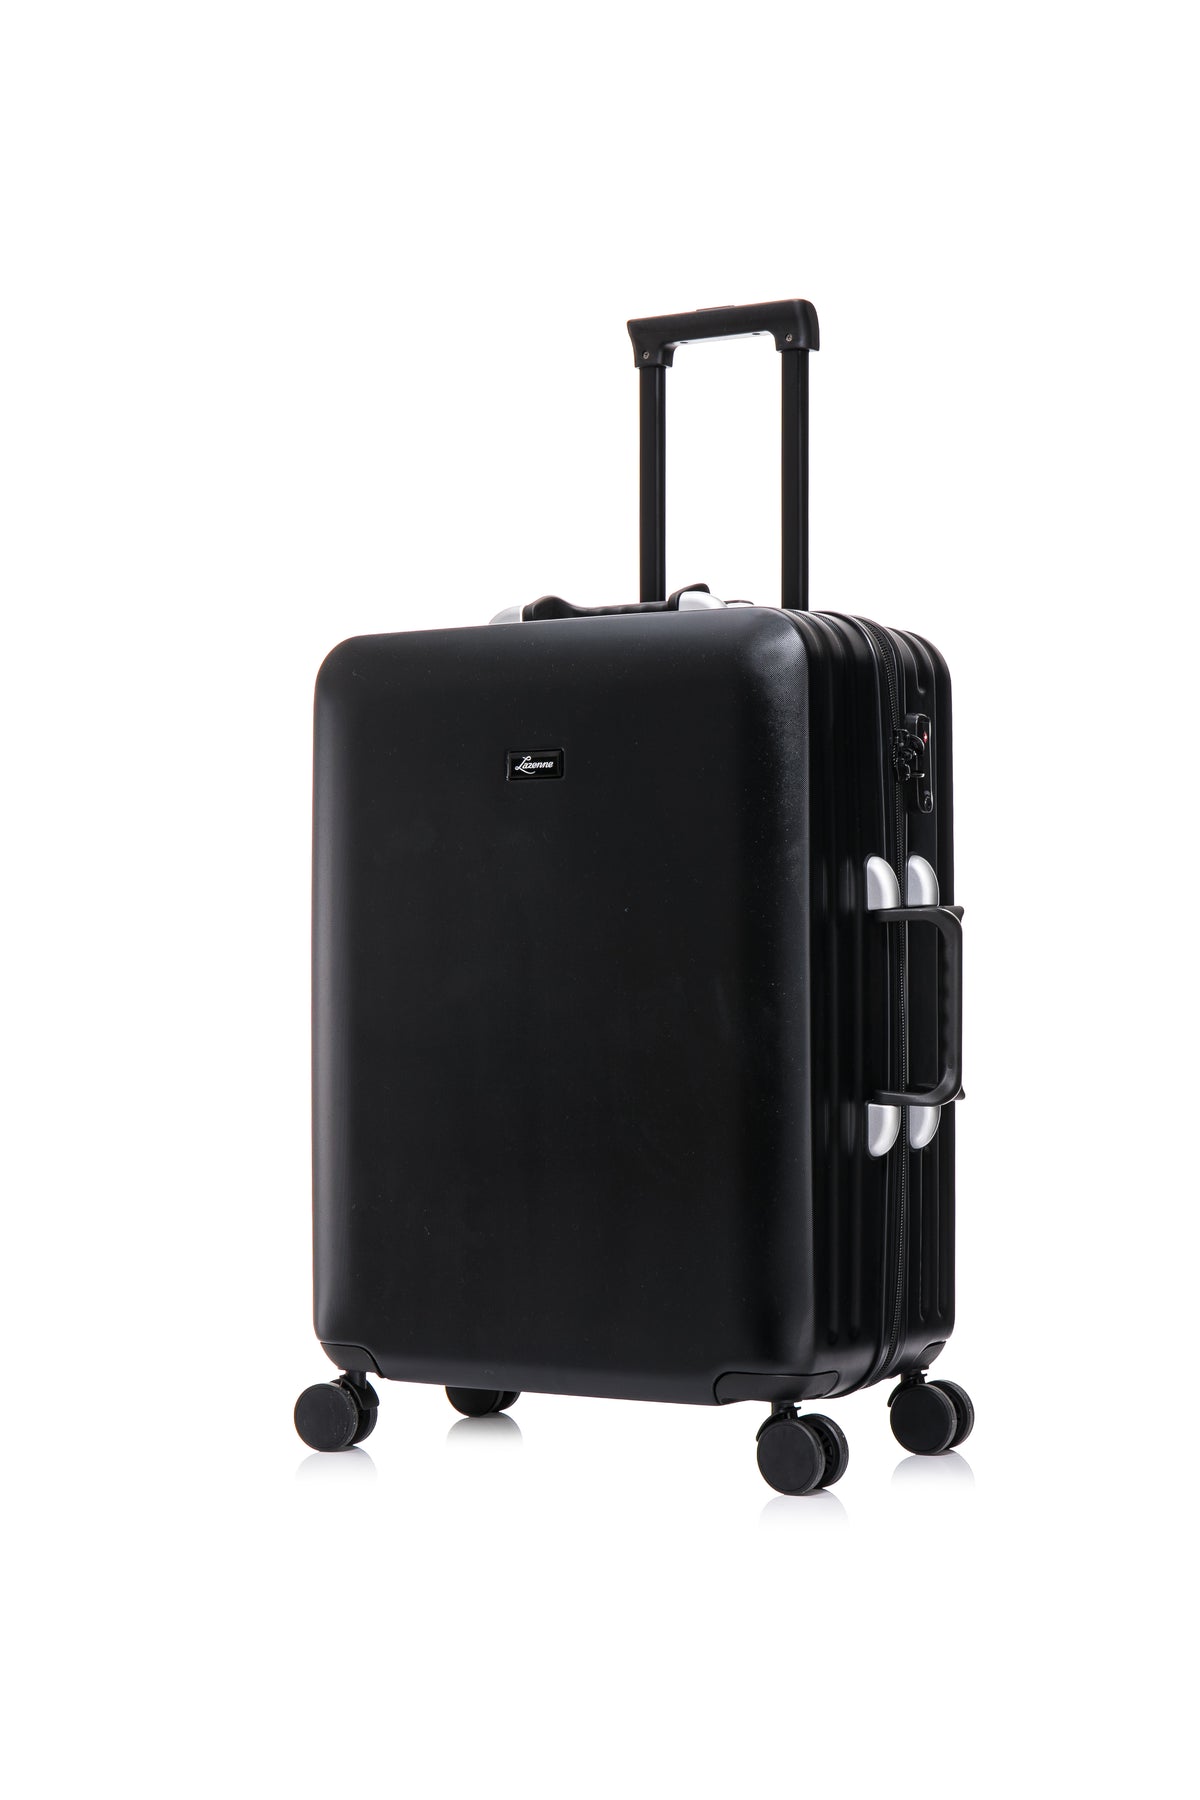 NEW!!! The Lazenne Wine Travel Suitcase for 12 bottles or 6 bottles + a mix of clothes, AIRLINE APPROVED & 10 YEARS WARRANTY